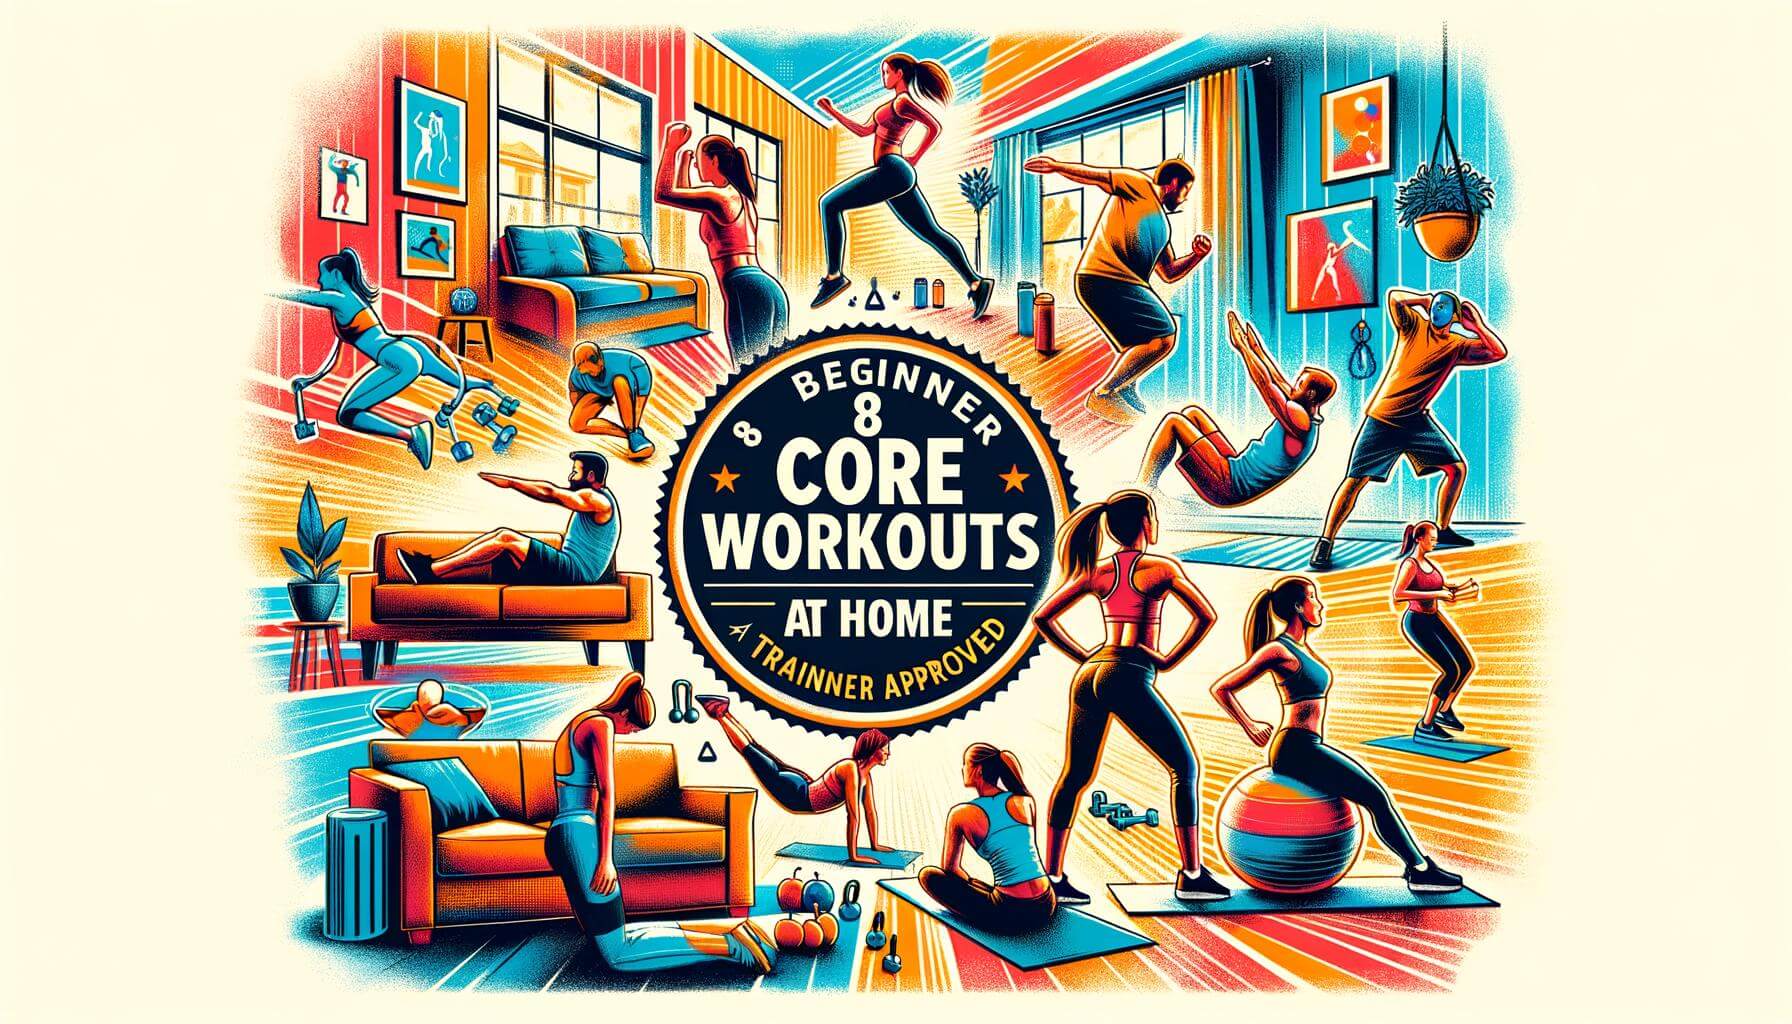 fitness 8 beginner core workouts at home — trainer approved